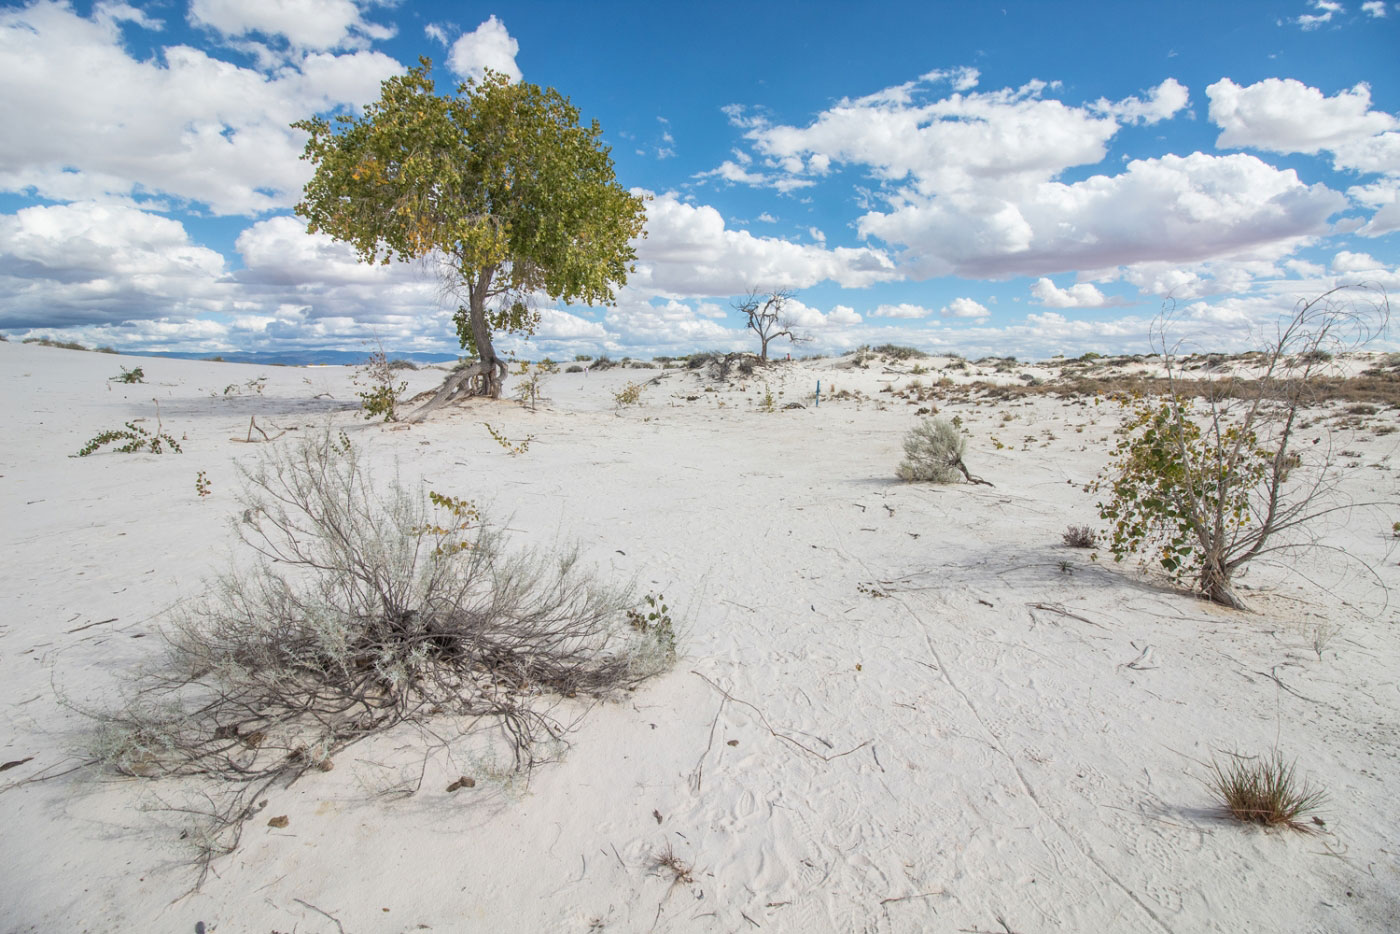 Hike Dune Life Nature Trail in White Sands National Park, New Mexico - Stav is Lost